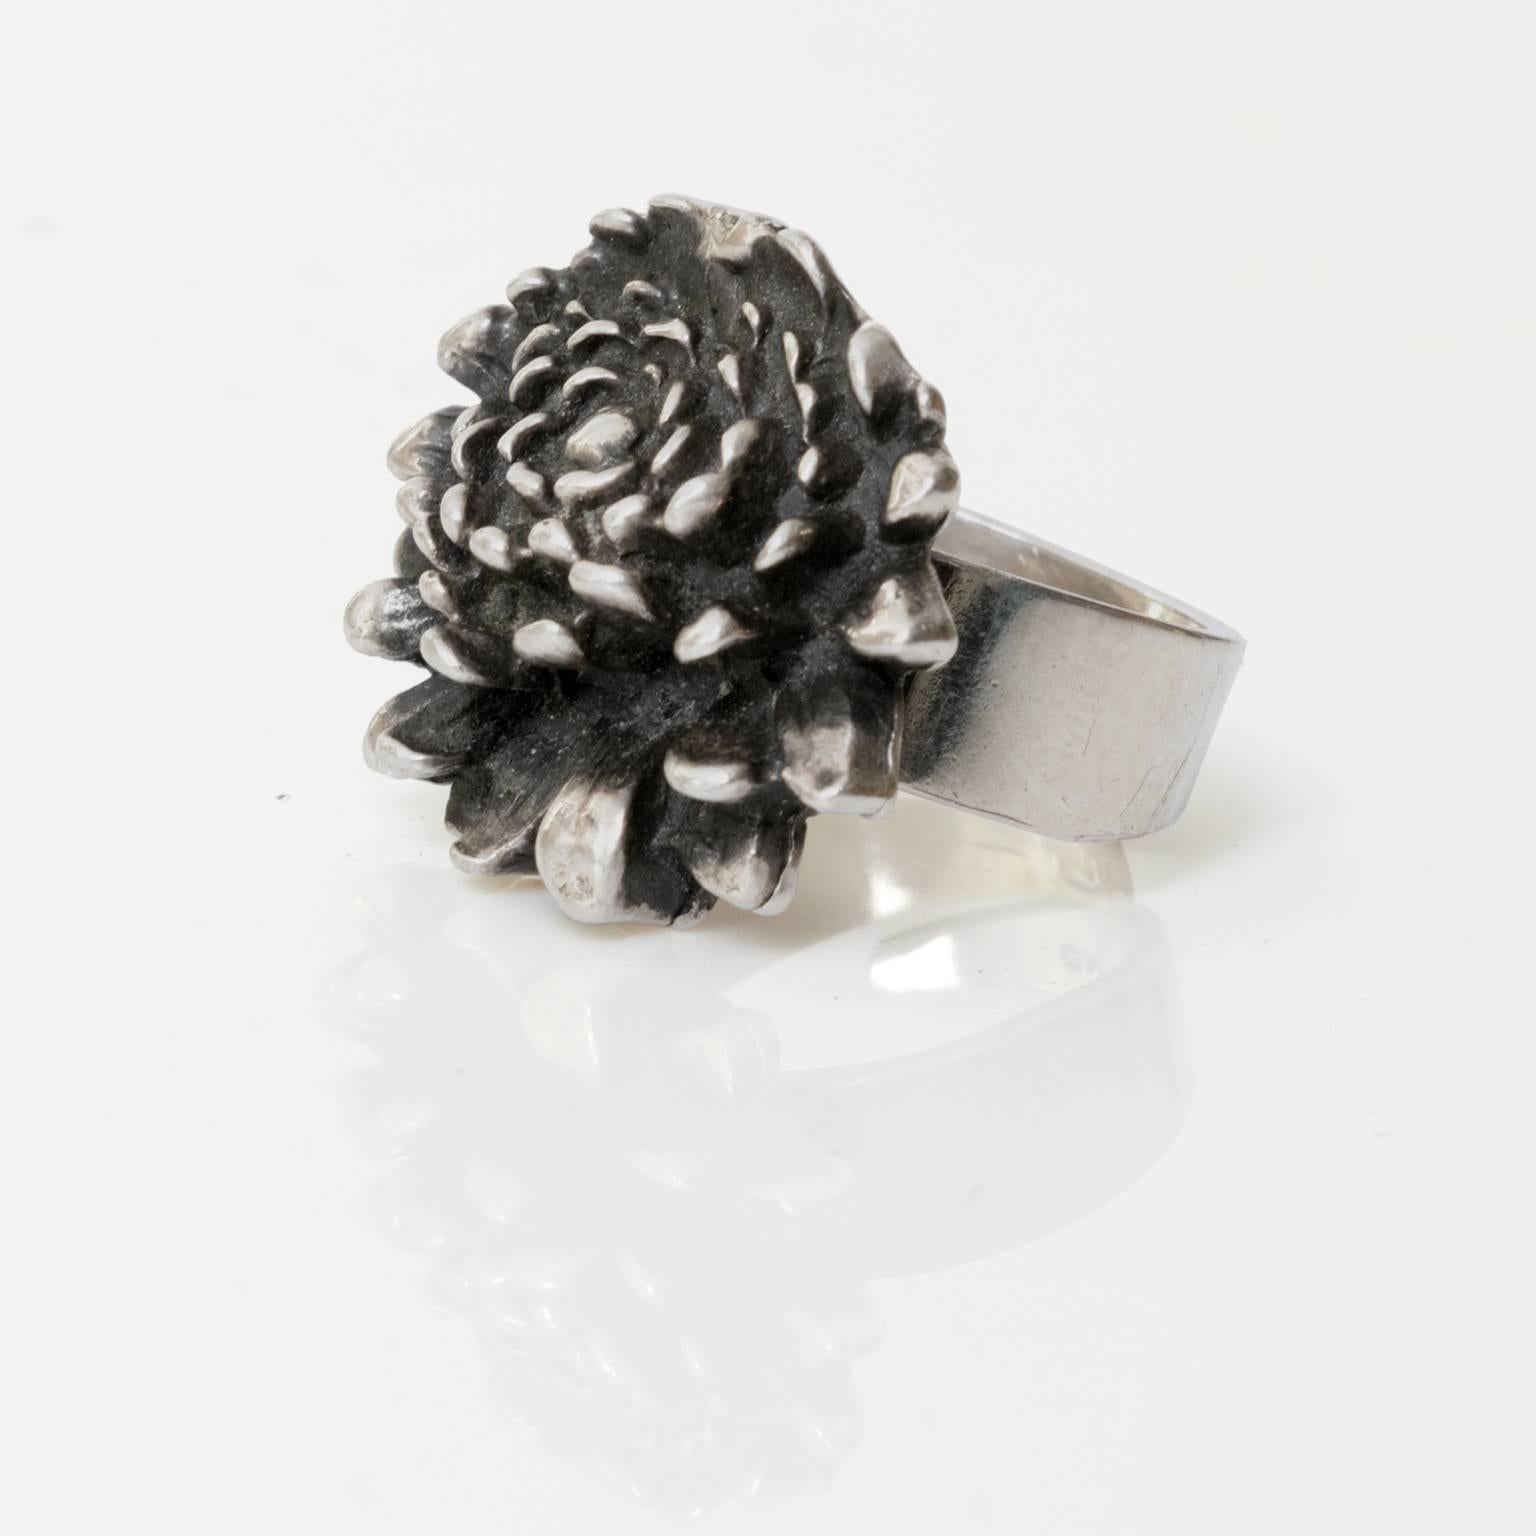 A Scandinavian Modern, Finnish silver ring in the form of a flower by Pentti Sarpaneva, for Åbo, 1972.
Diameter: 1"
Height: .75"